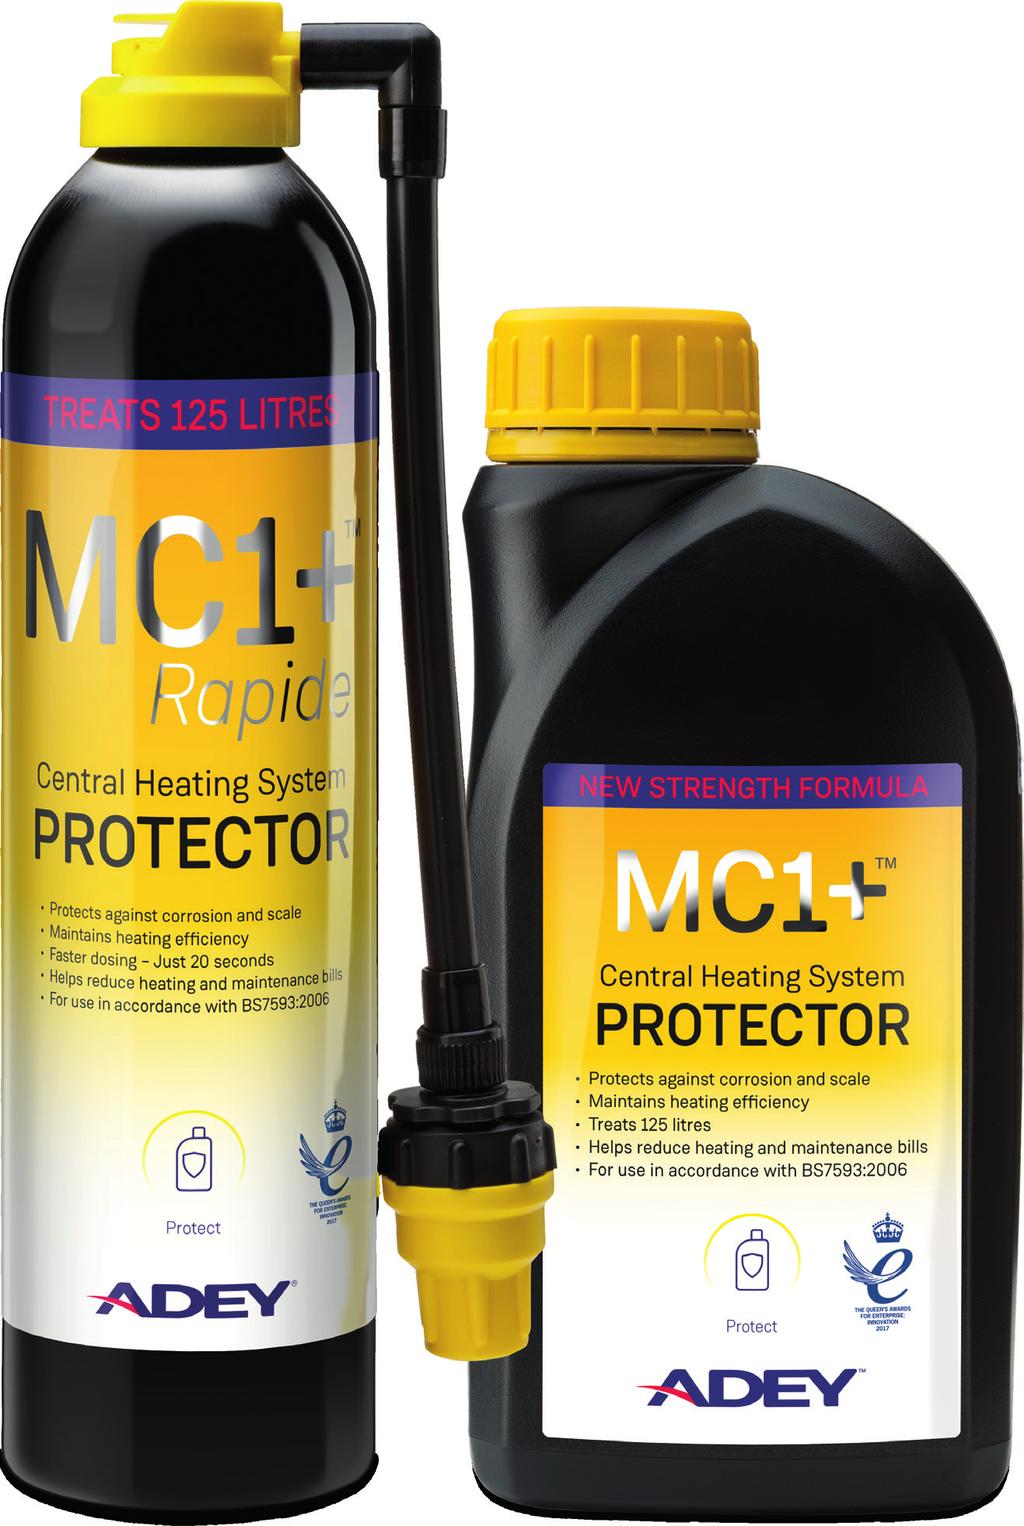 Central Heating System PROTECTOR High performance MC1+ Protector prevents both system corrosion and limescale deposition.